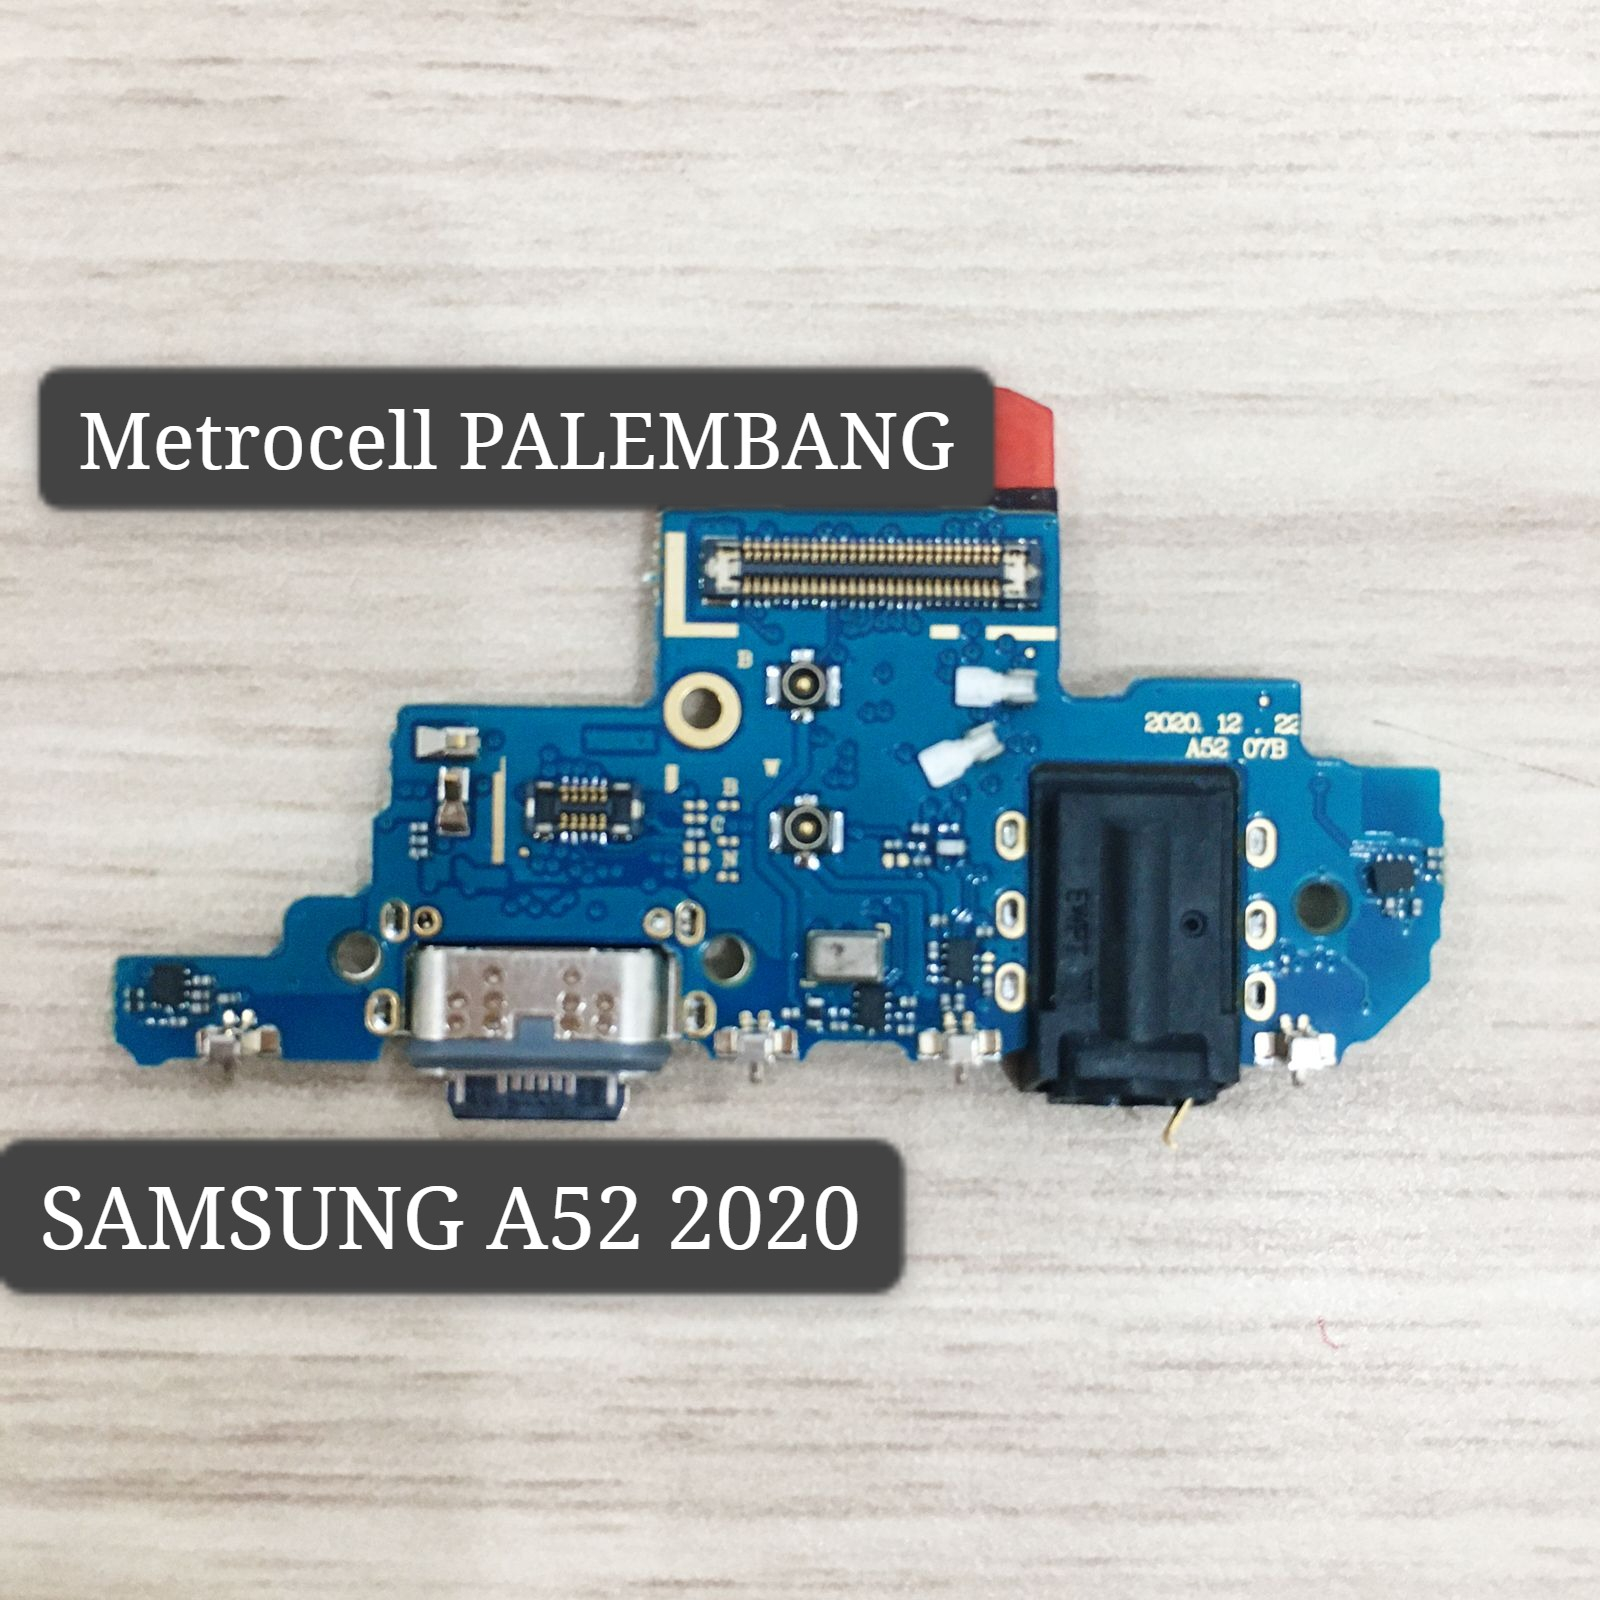 PCB CHARGER CONNECTOR CHARGER SAMSUNG A52 2020